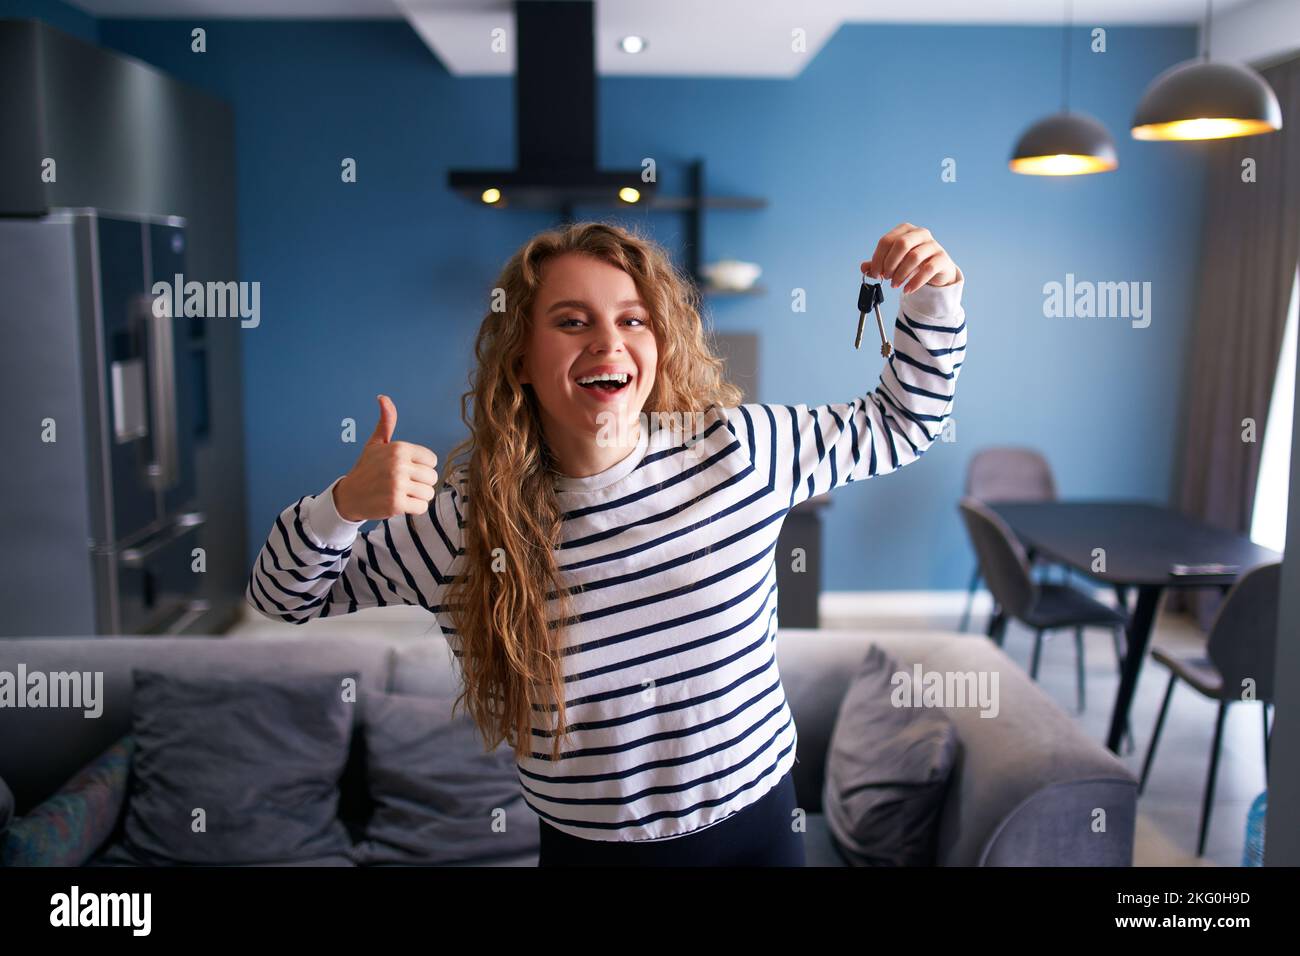 Happy woman showing new house or apartment keys to camera in modern interior. Female tenant renter with new home keys moving to tenancy. Lady Stock Photo